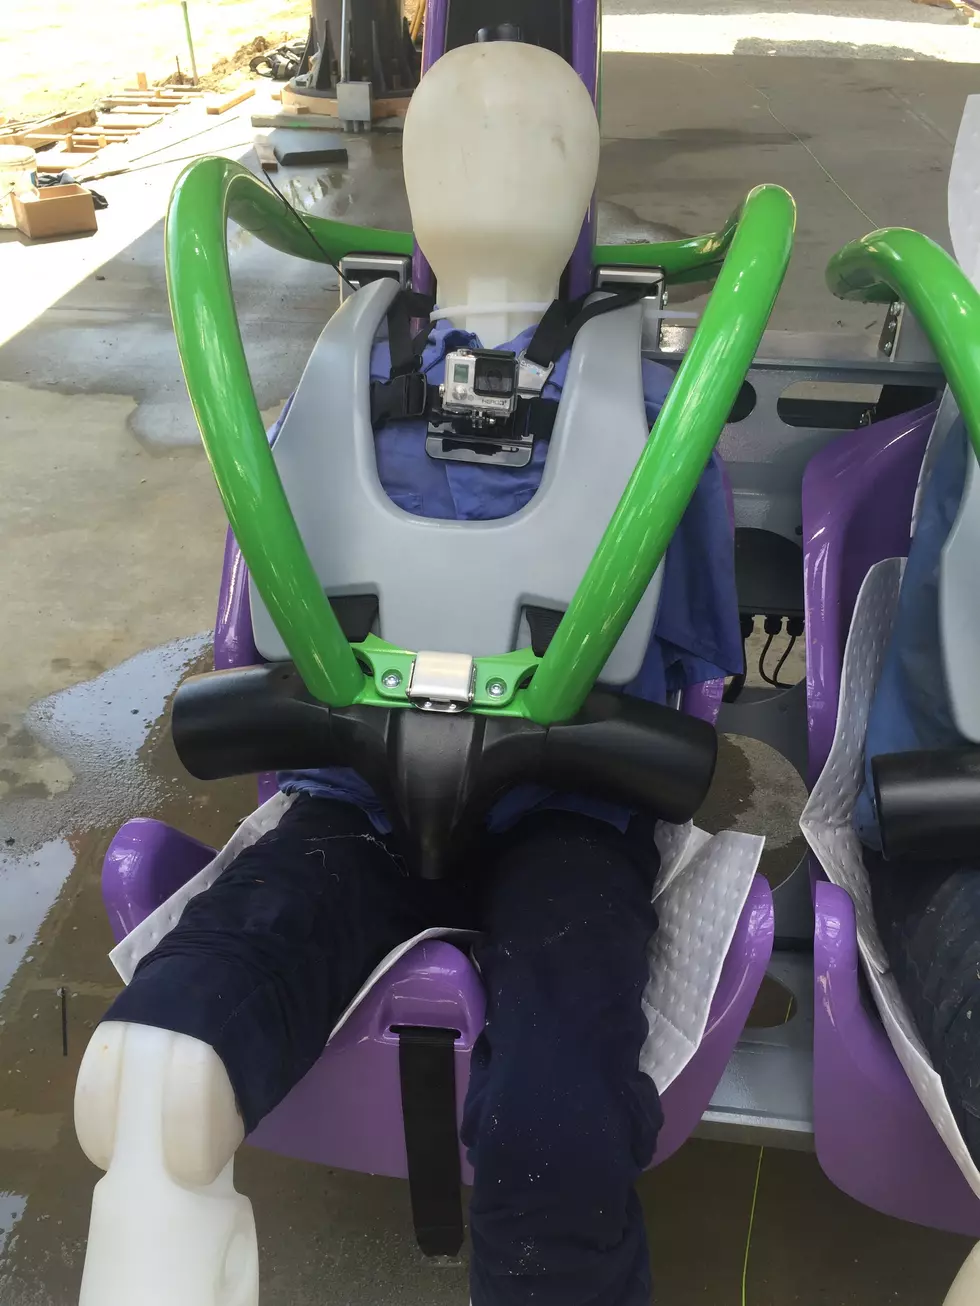 Take A First Look At Great Adventure’s The Joker In Action [Video]